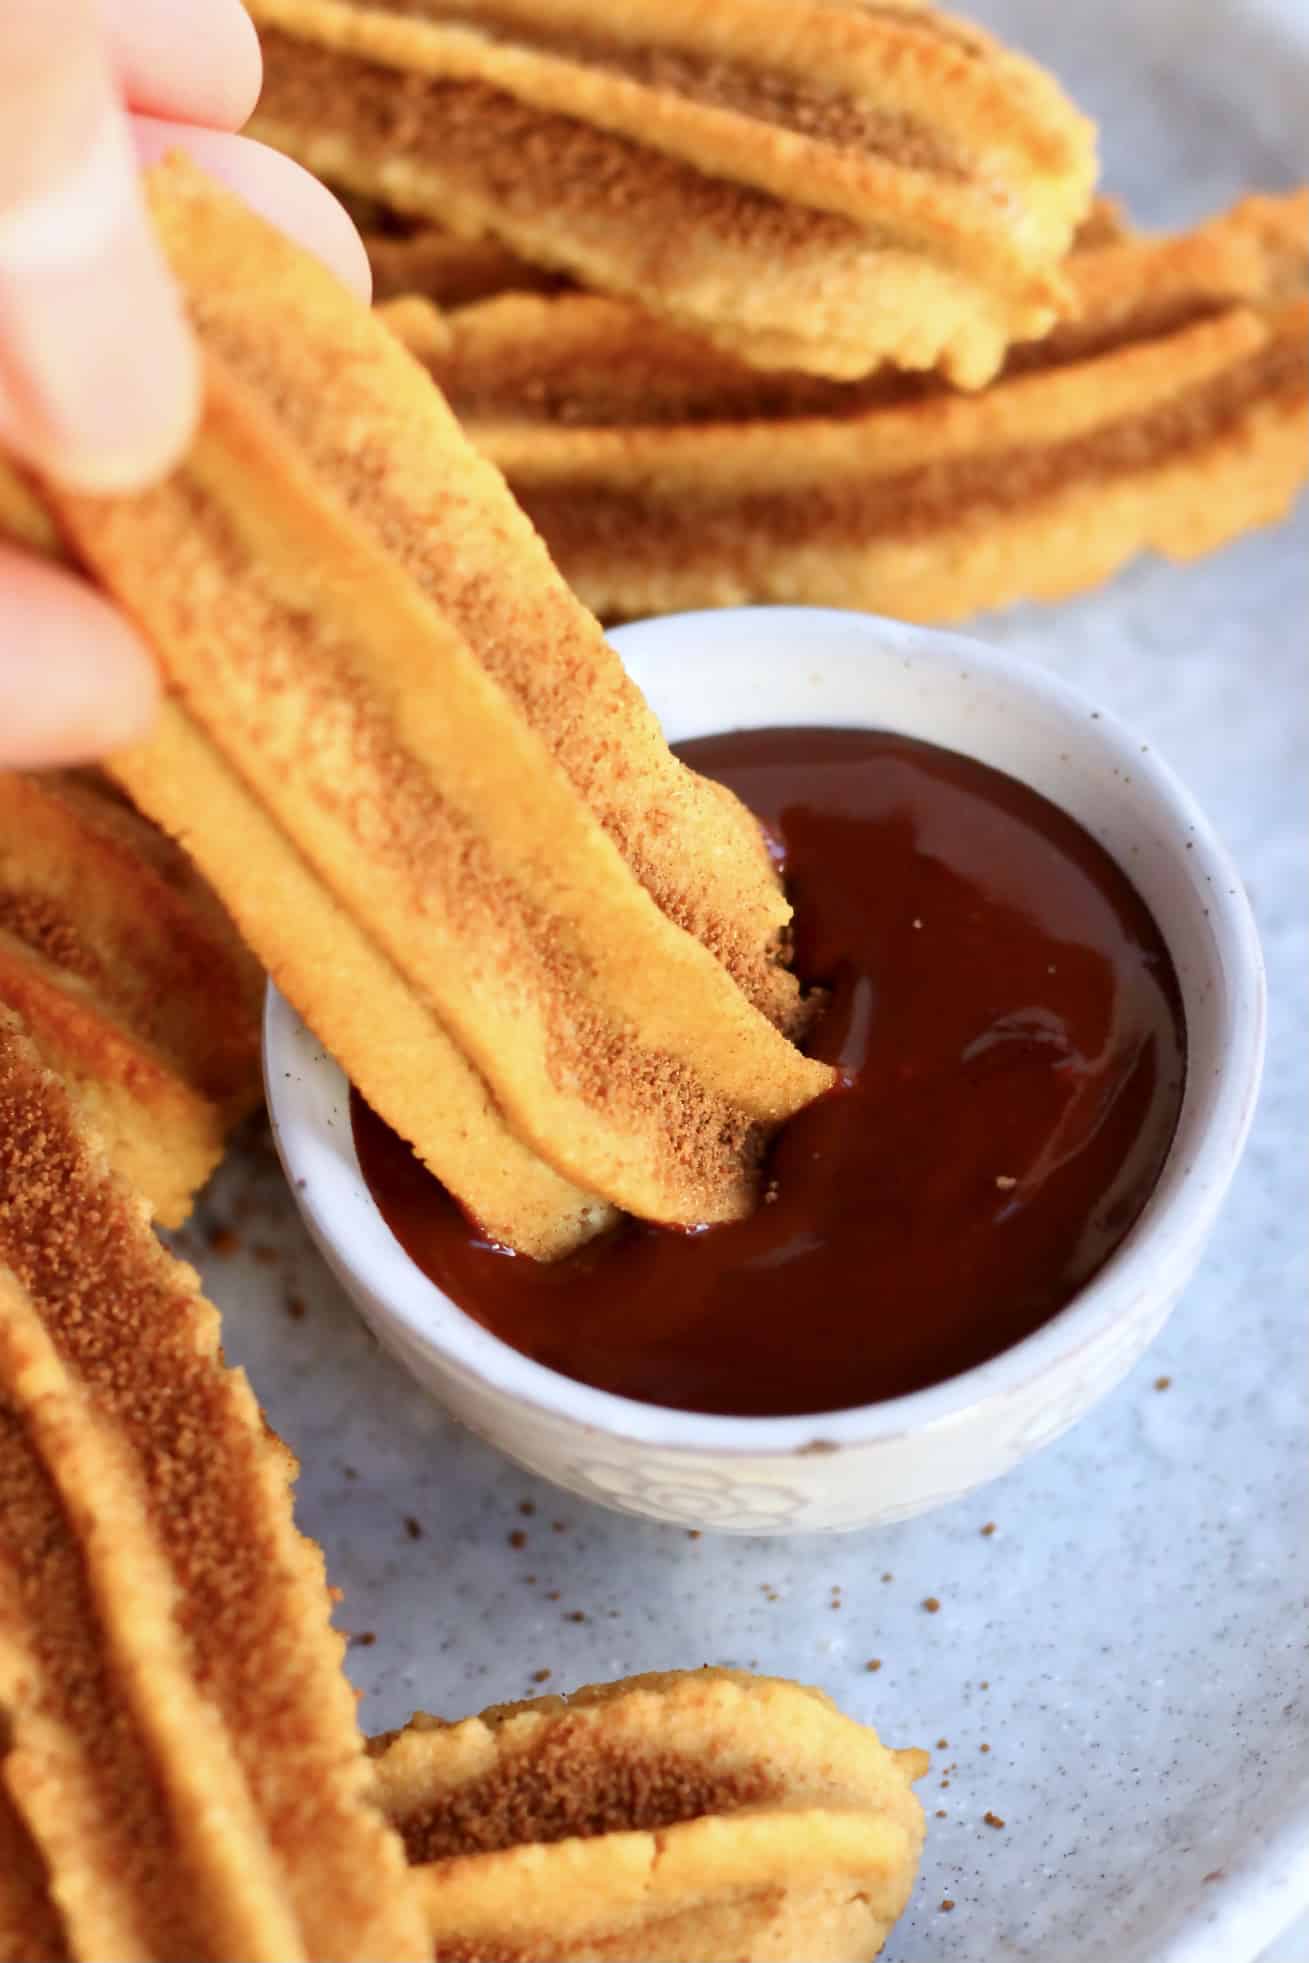 A gluten-free vegan churro being dipped into a bowl of vegan chocolate sauce